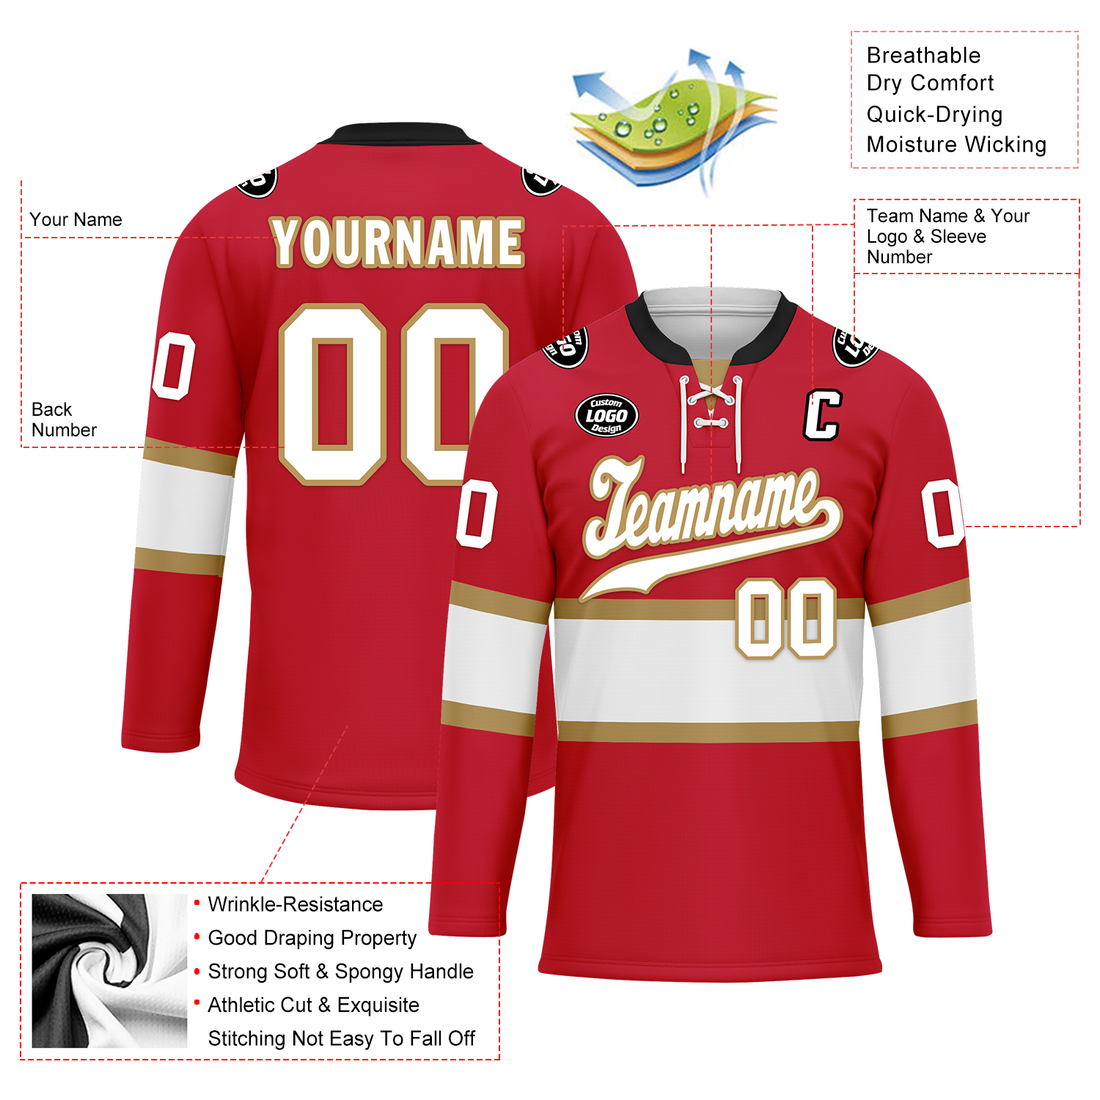 Custom Red White Personalized Hockey Jersey HCKJ01-D0a70ae